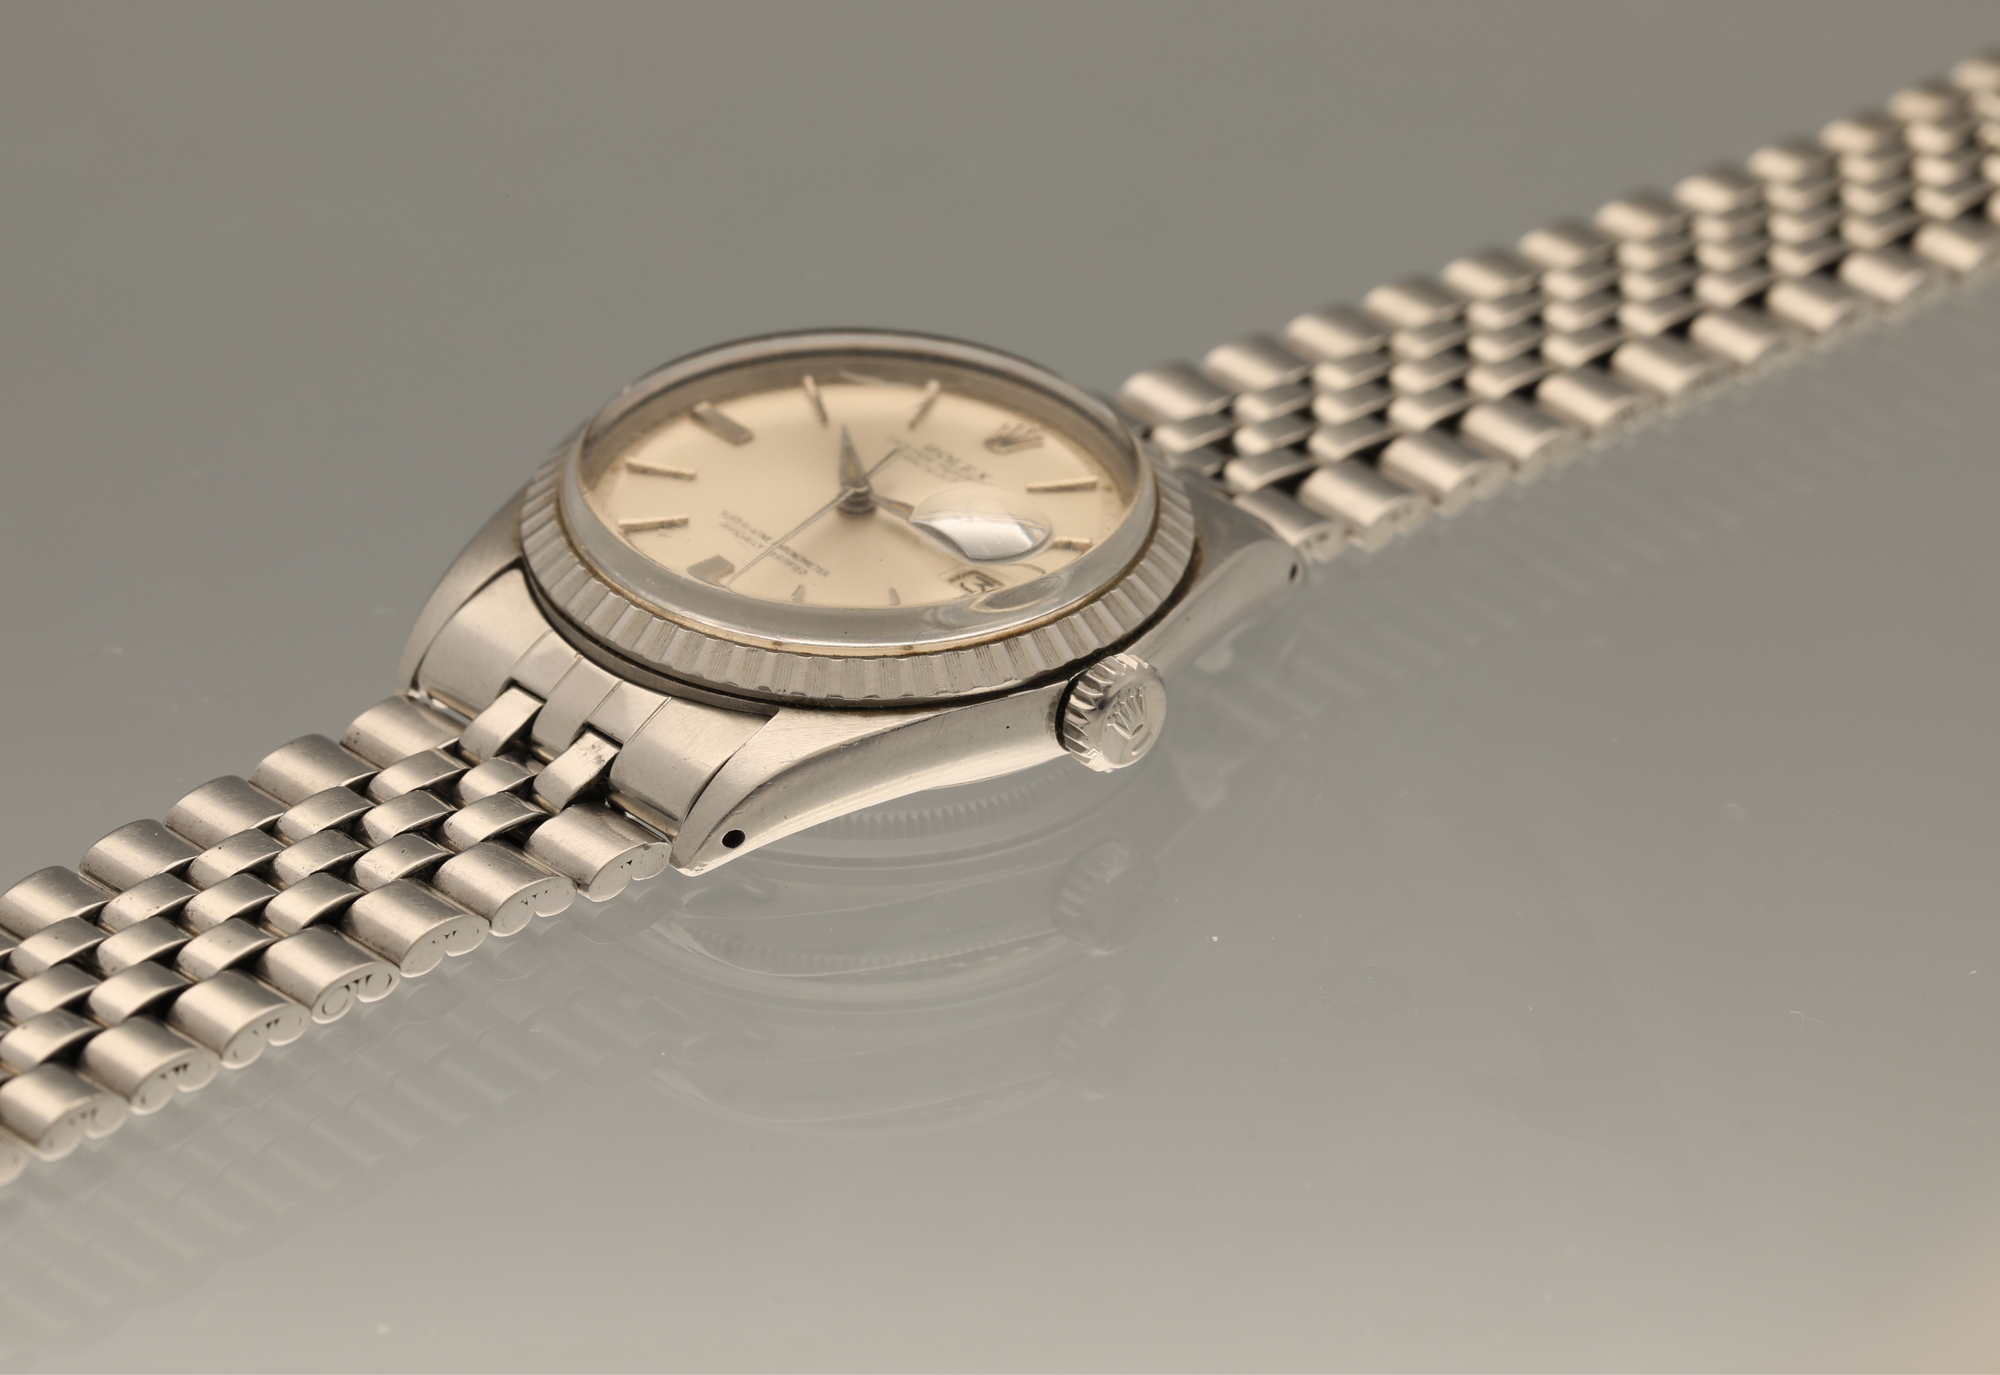 Rolex 1603 Datejust from 1965 with alpha hands